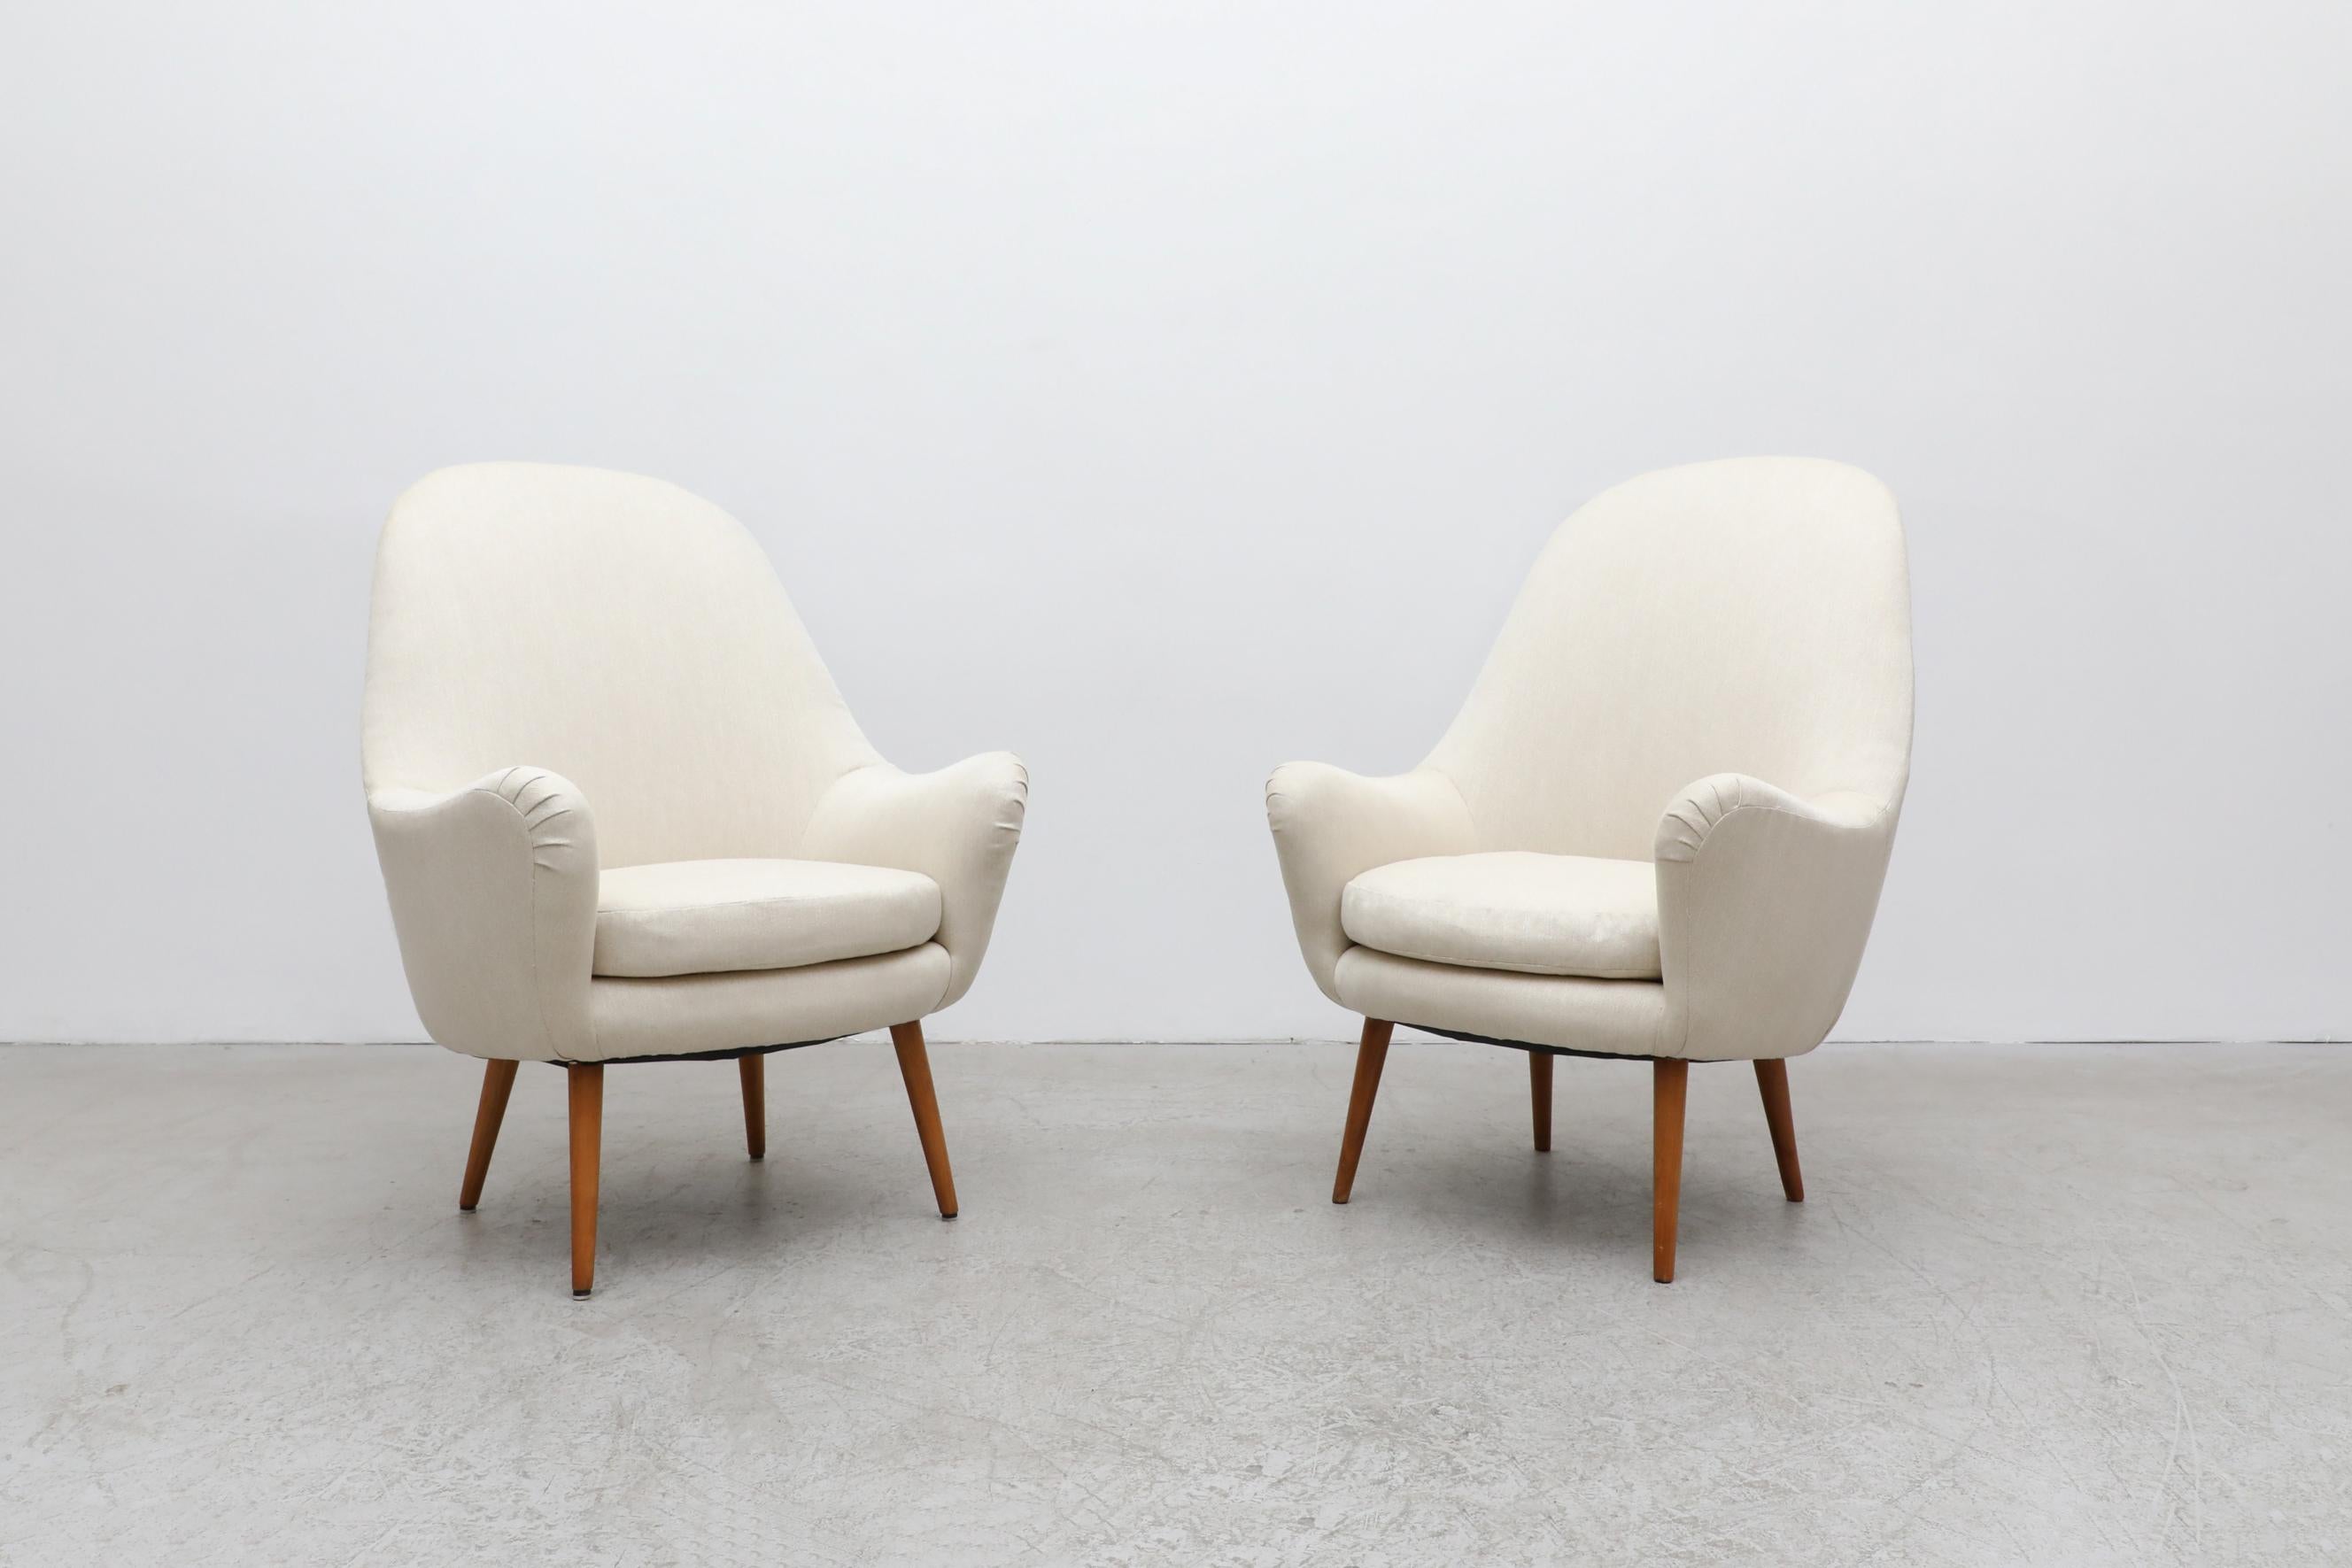 Dramatic, Mid-Century, Swedish, upholstered lounge chairs attributed to post-war design luminary Carl Malmsten with handsomely tapered legs and a new ivory upholstery. Carl Malmsten was a Swedish furniture designer, architect, and educator who was